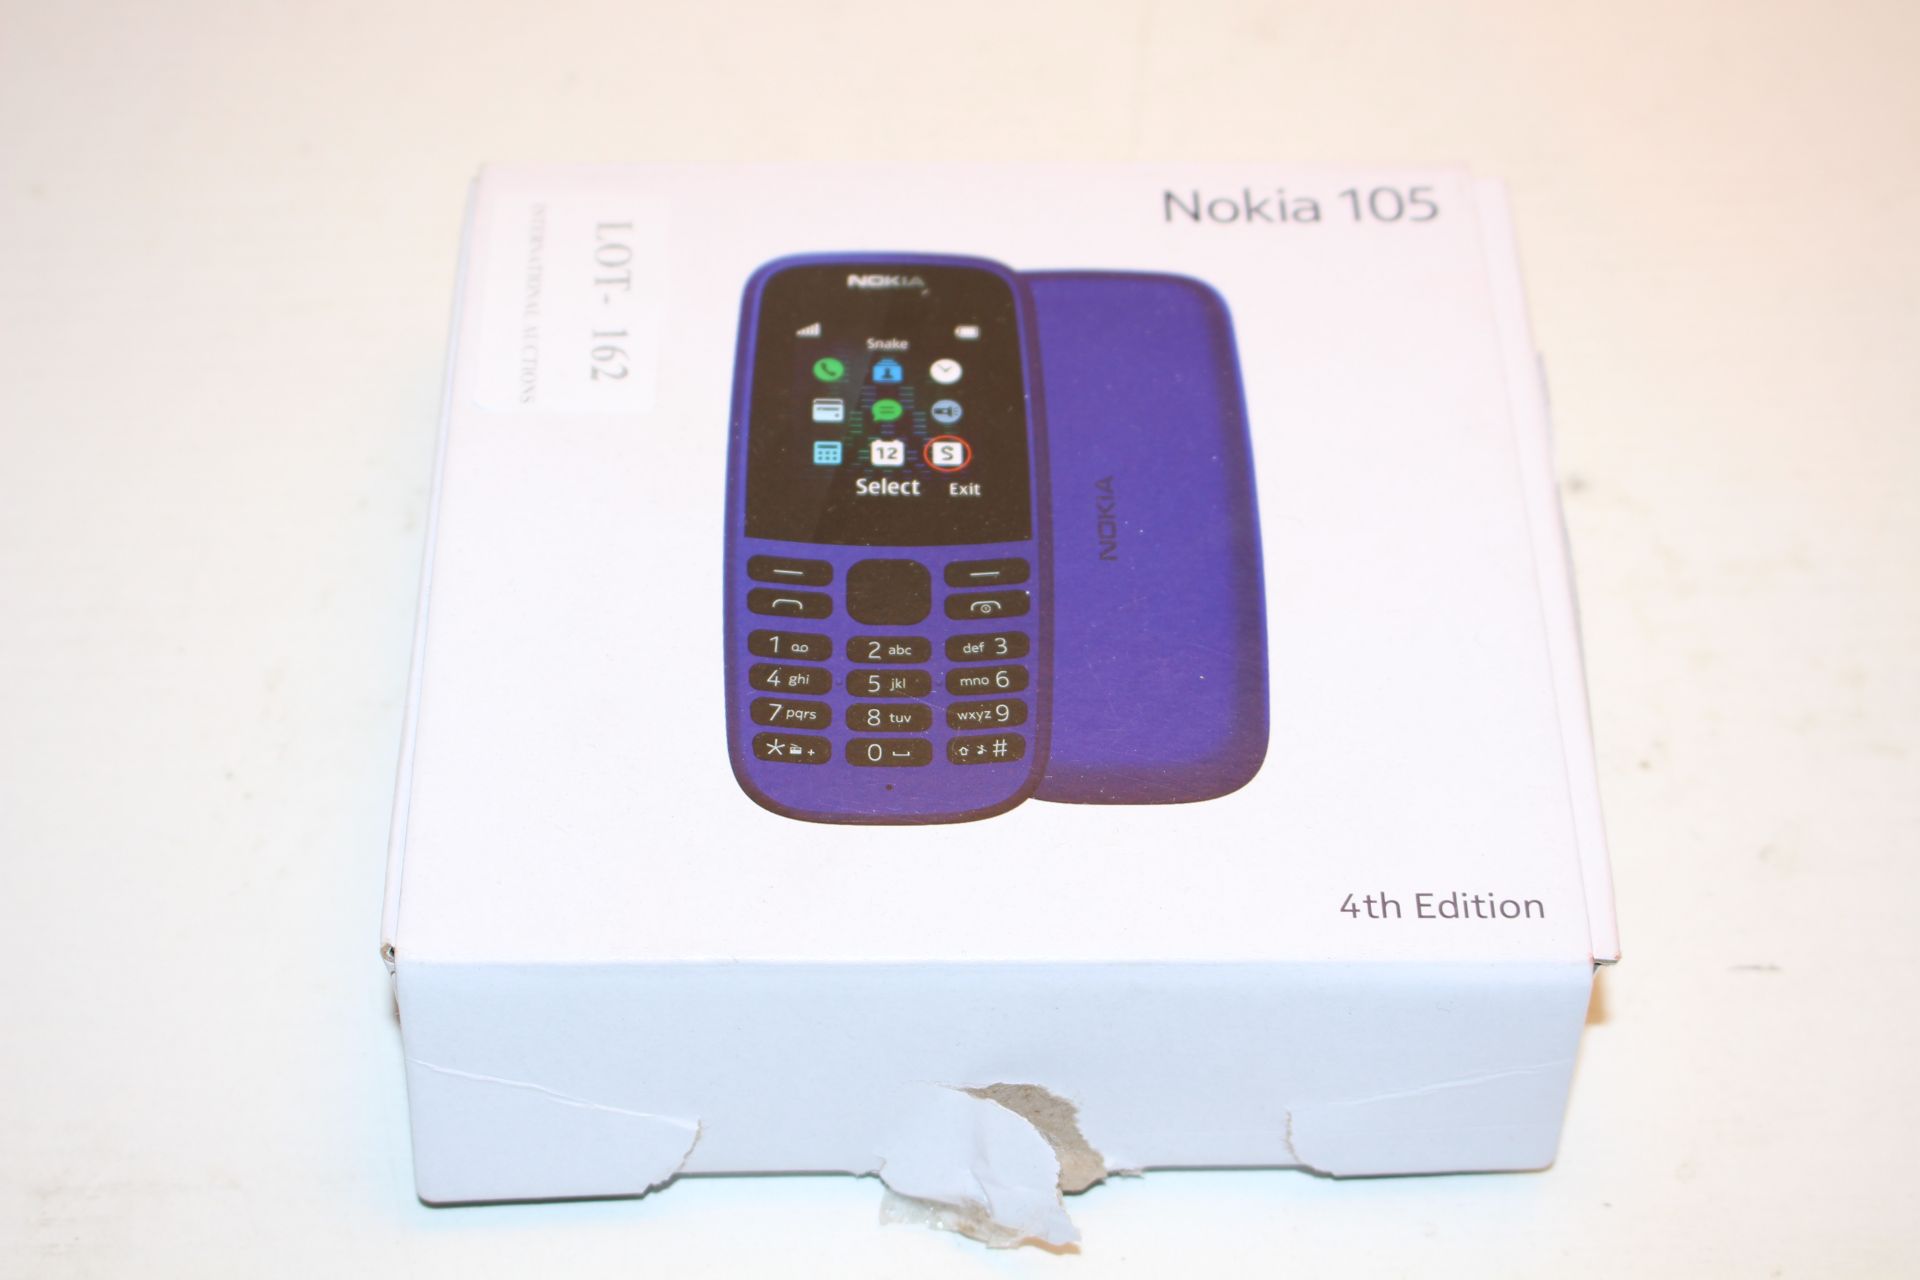 BOXED NOKIA 105 4TH EDITION MOBILE PHONE RRP £17.95Condition ReportAppraisal Available on Request-